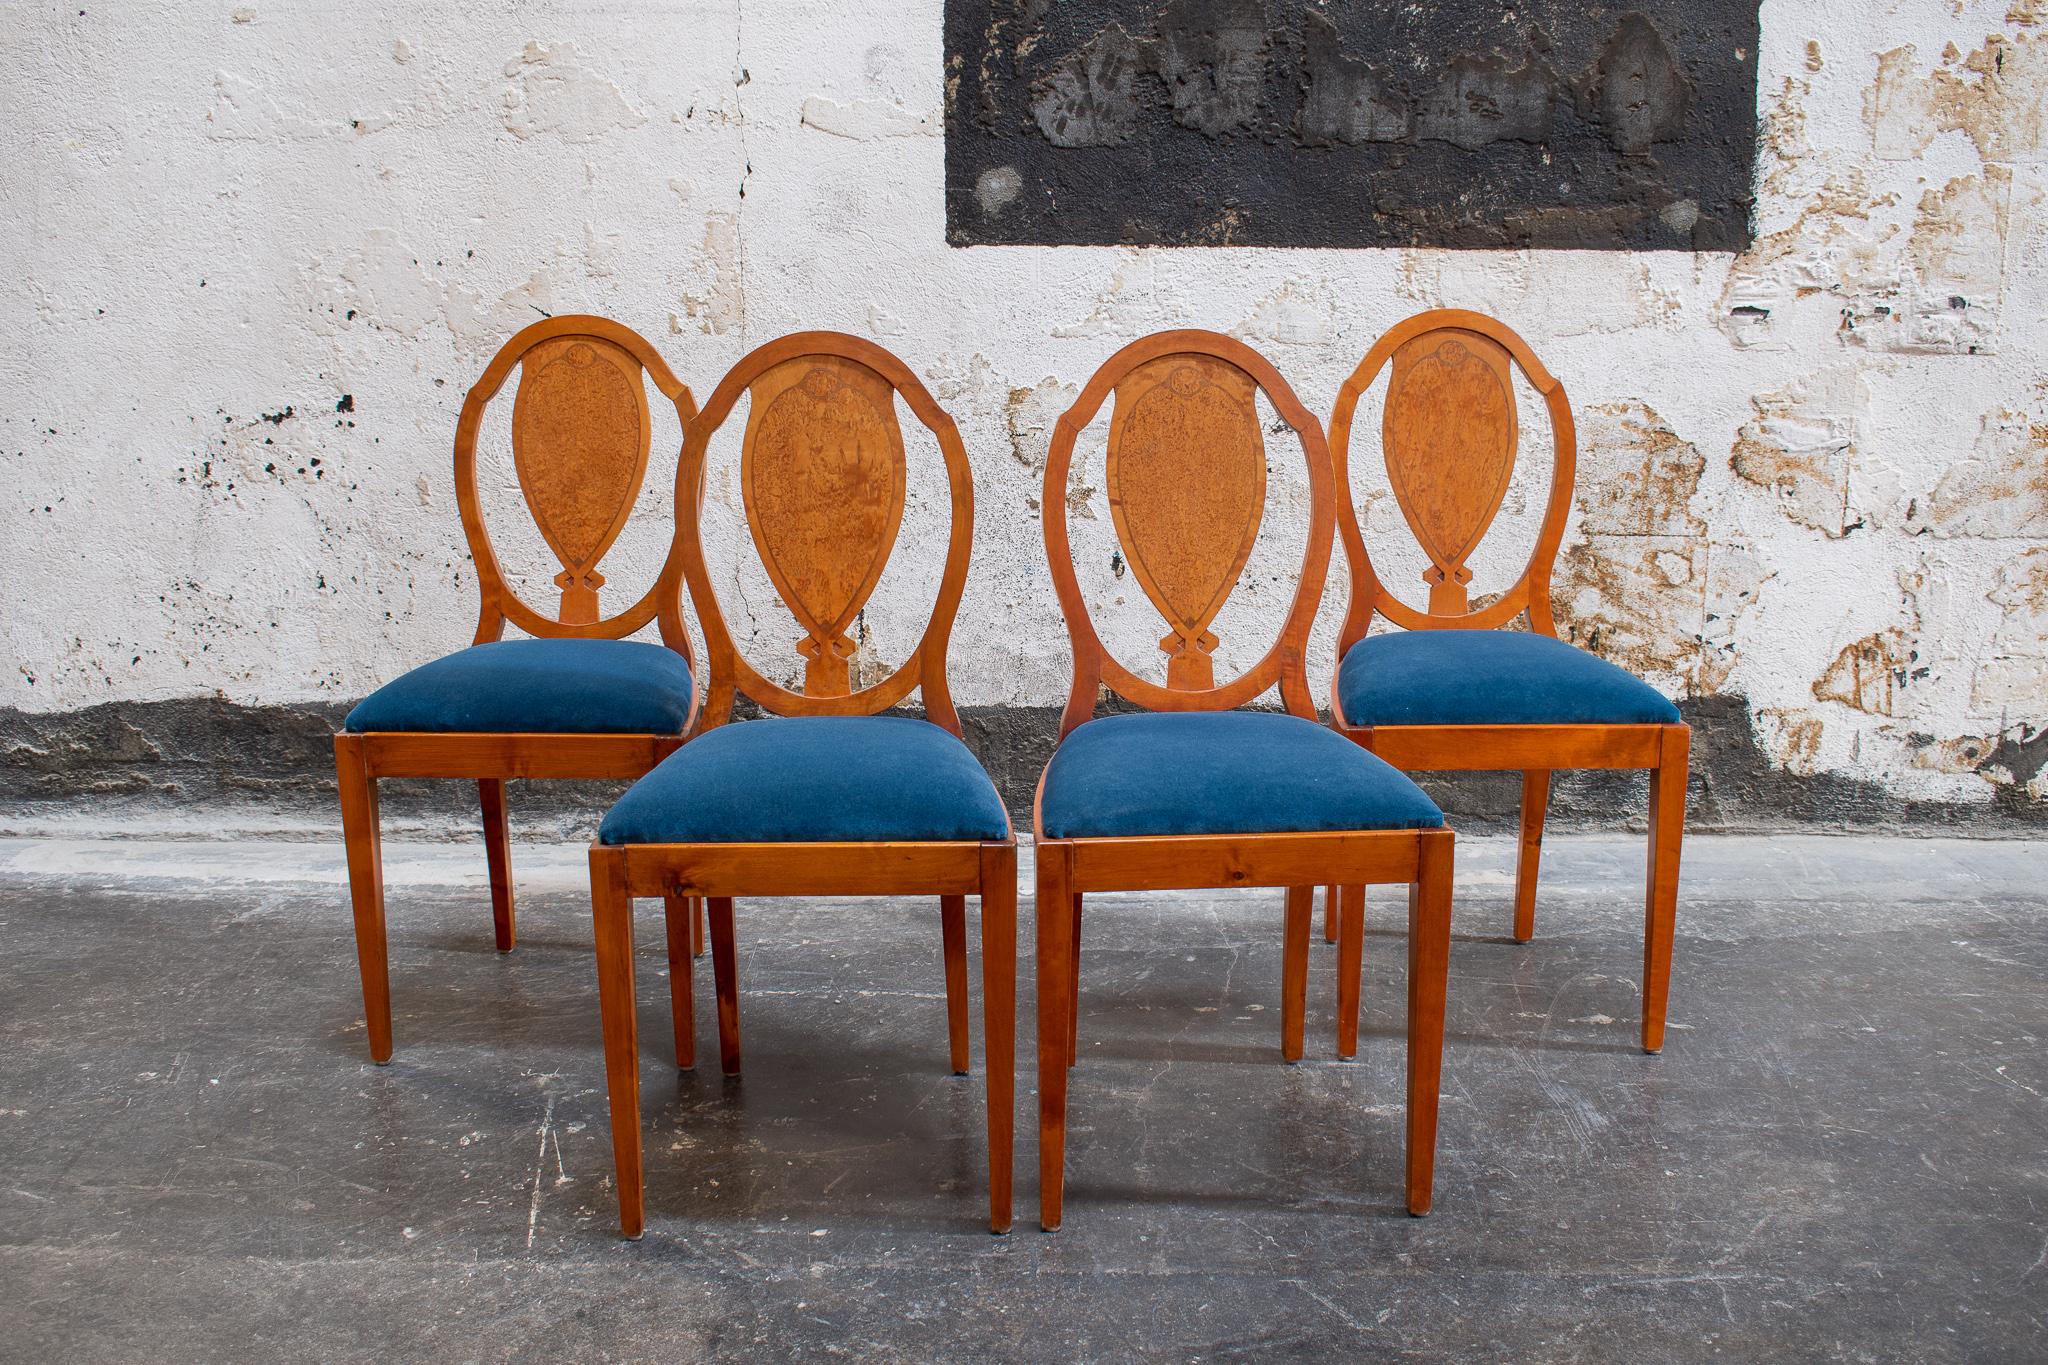 Solid golden birch chairs with rare Masurbjork, sometimes also referred to as Karelian birch or Burl Birch, inlaid shield back rests. This is a very special dining chair set, in wonderful condition considering their age. The vintage royal blue